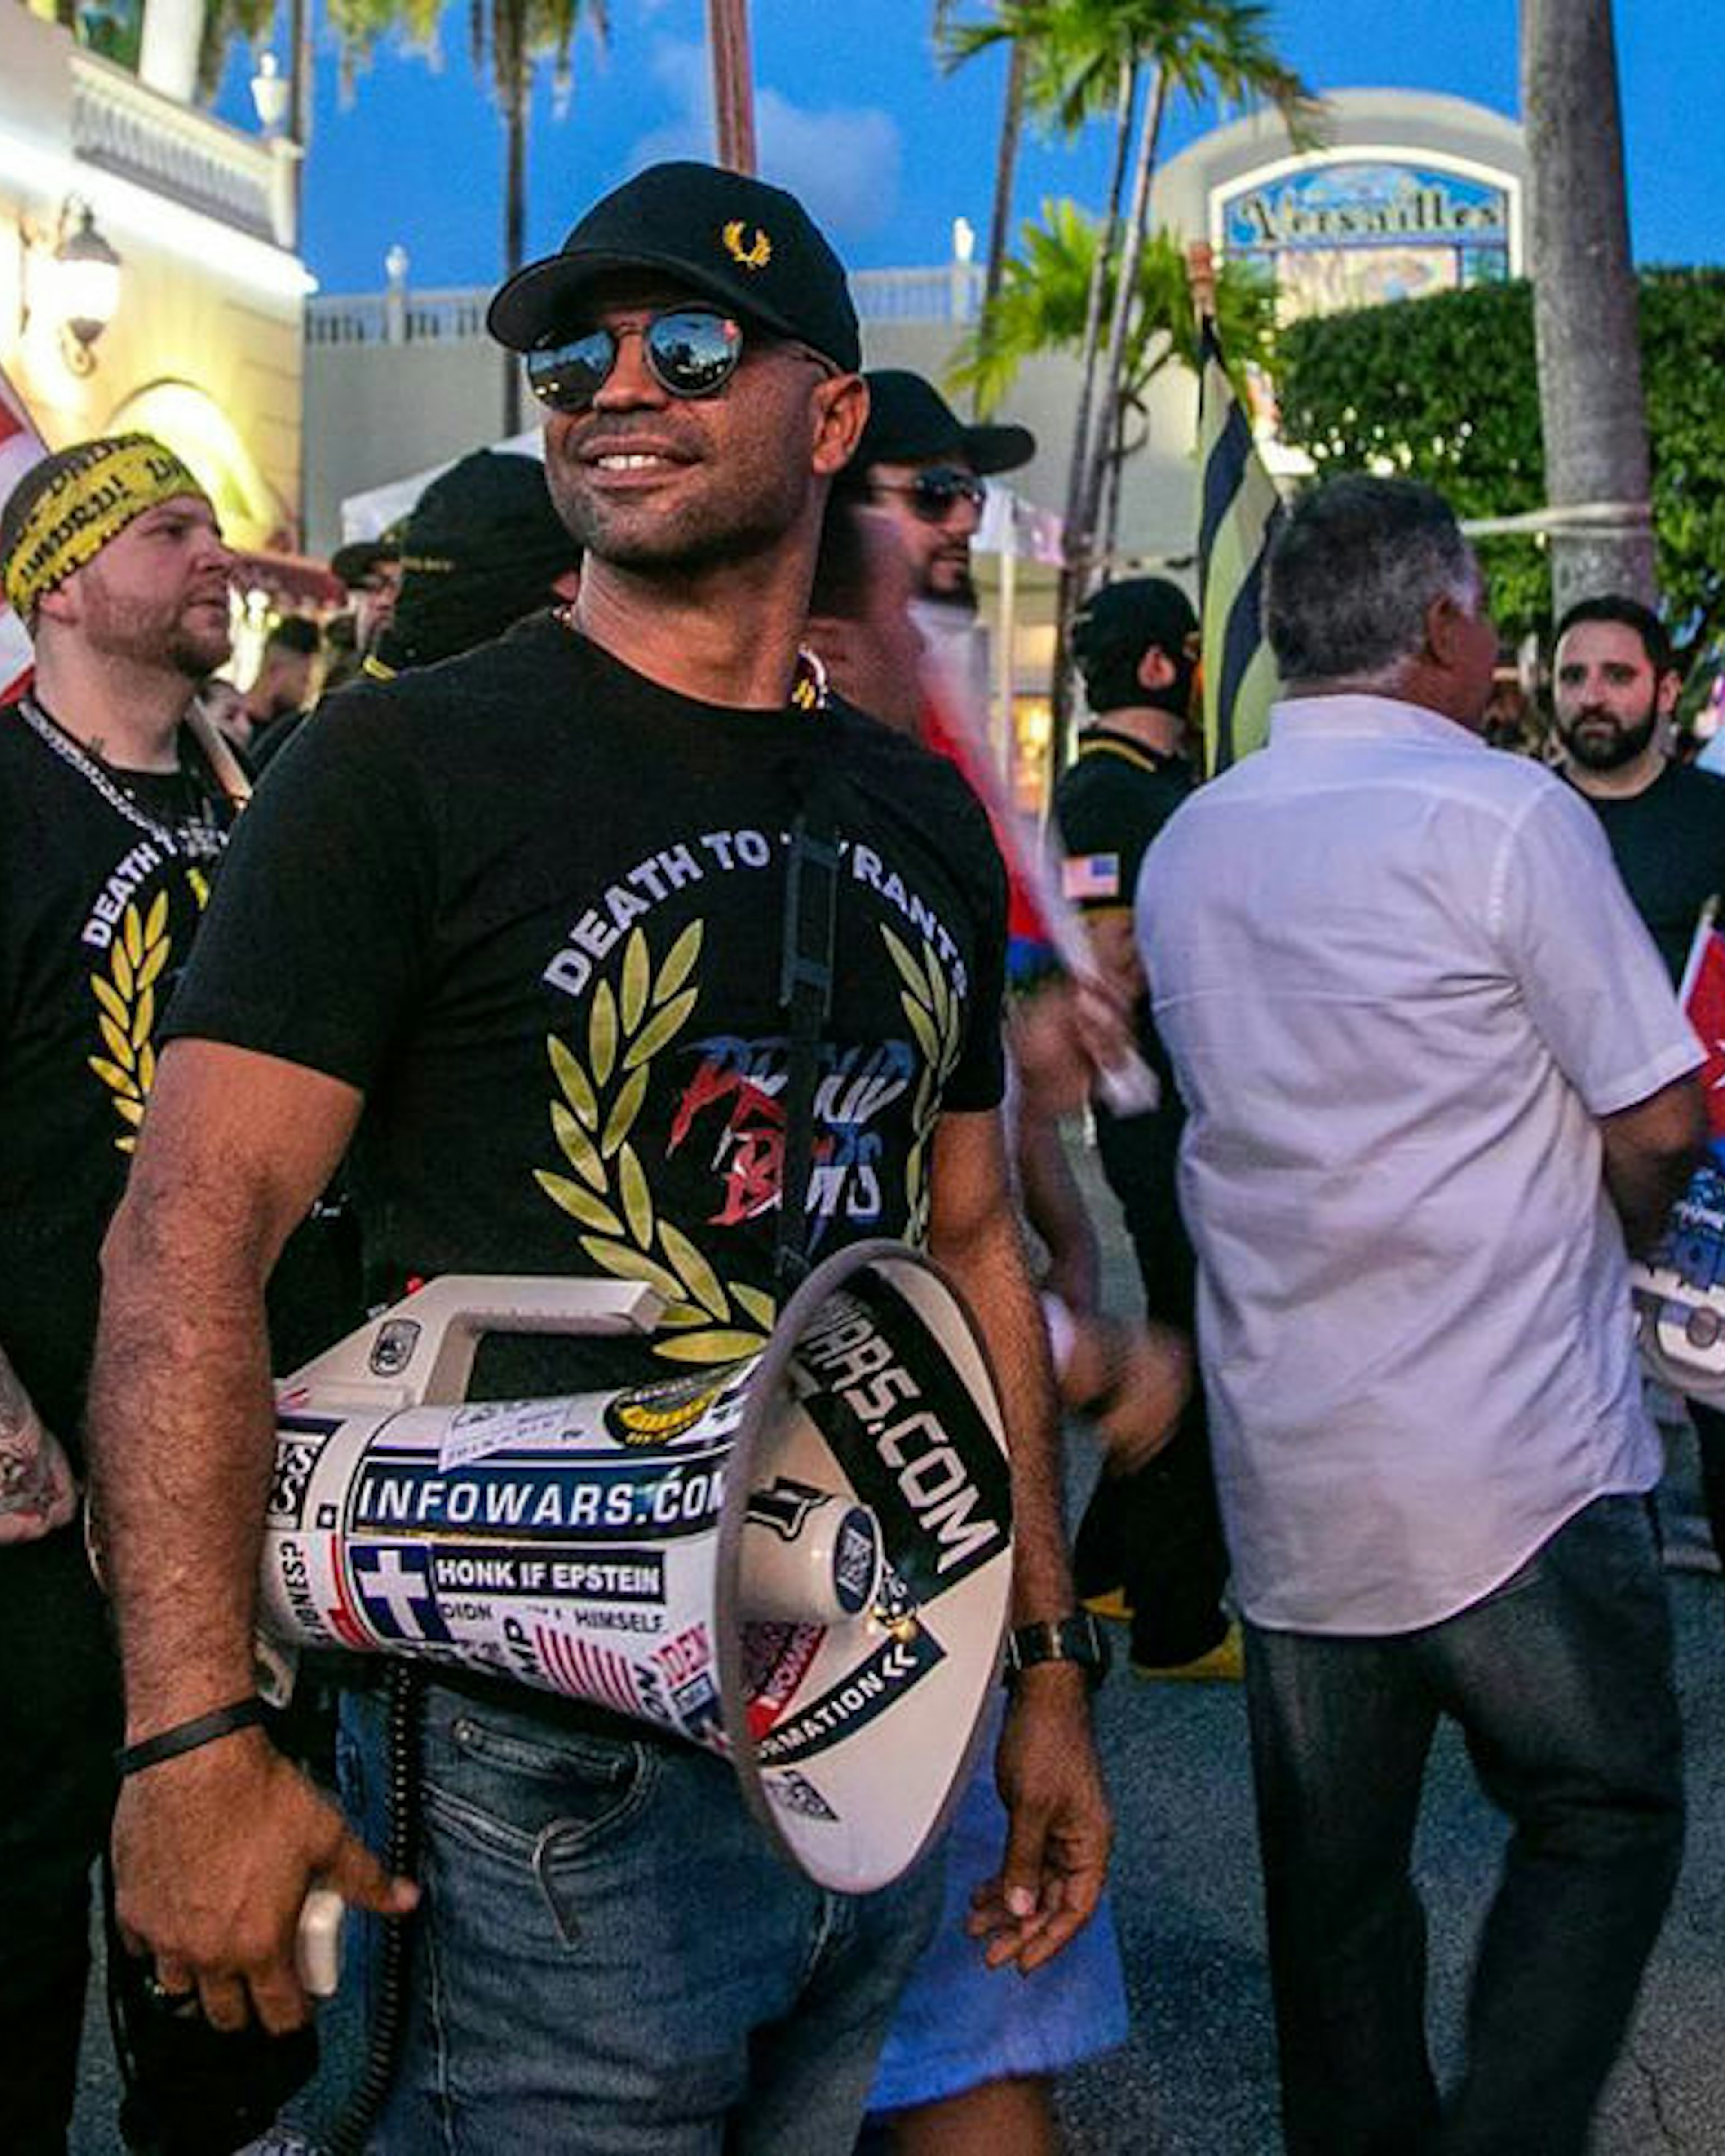 Proud Boy Enrique Tarrio in front of the Versailles Restaurant in Miami, before his arrest in connection with the storming of the Capitol. The Miamian, once a leader of the group, is no longer in charge. (Pedro Portal/El Nuevo Herald/Tribune News Service via Getty Images)